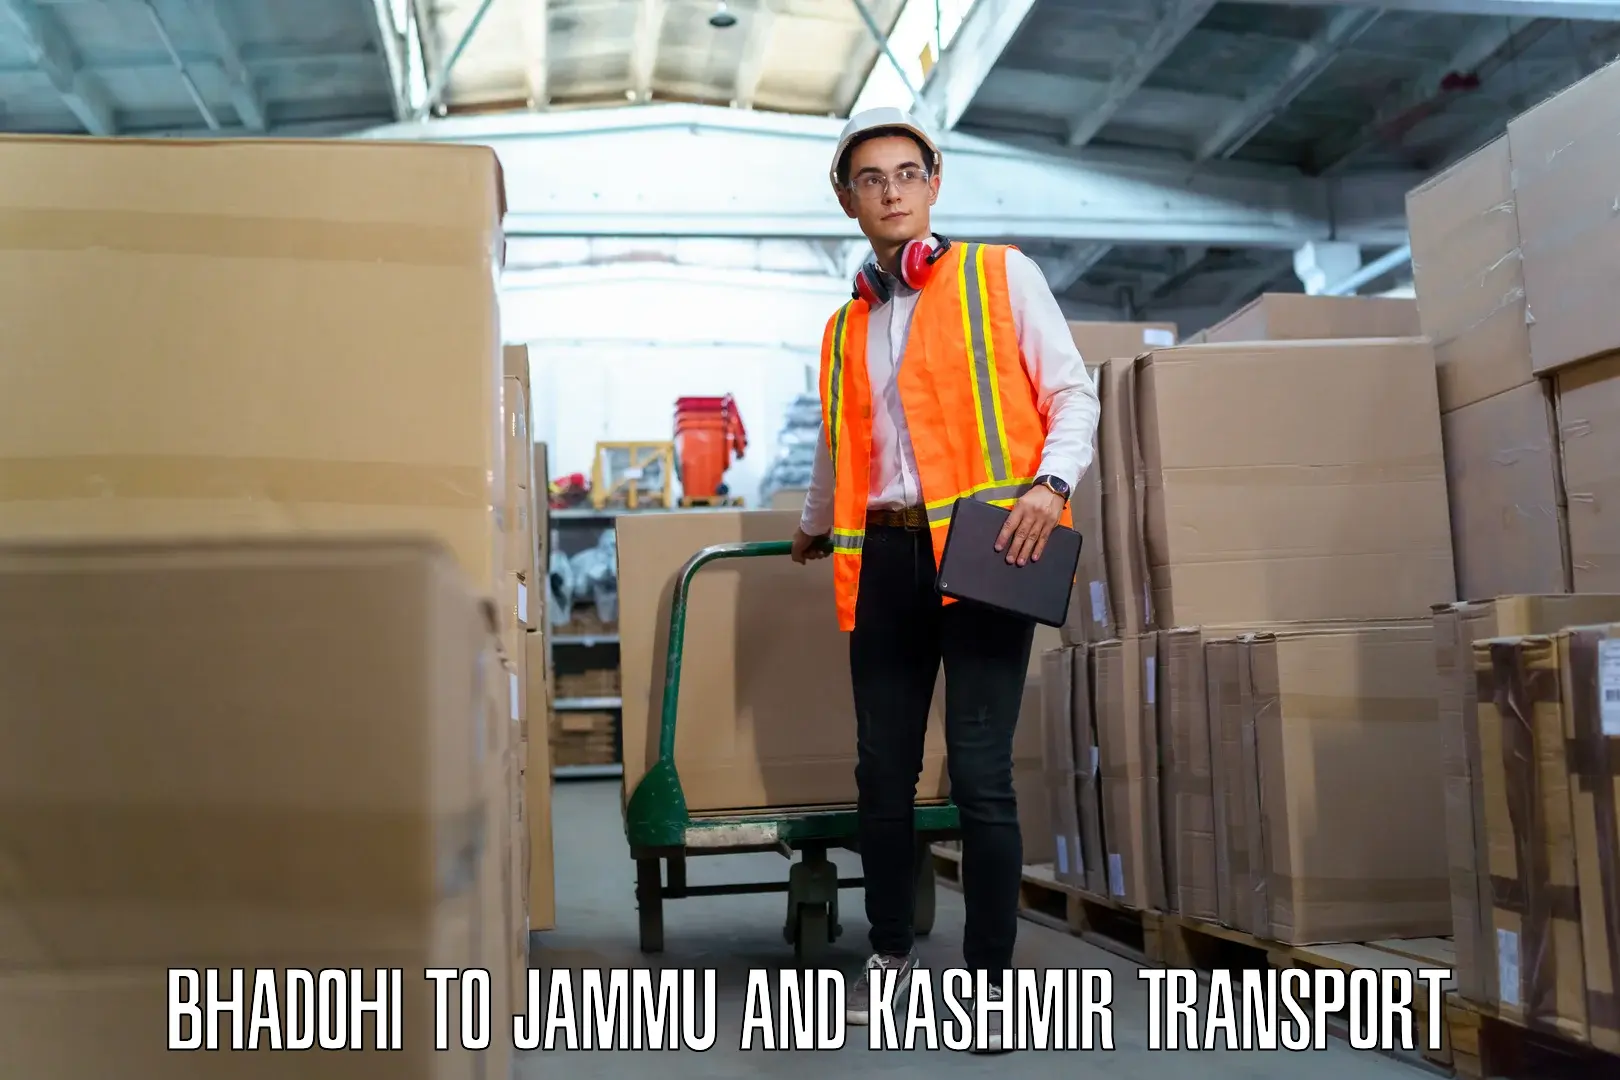 Part load transport service in India Bhadohi to Anantnag